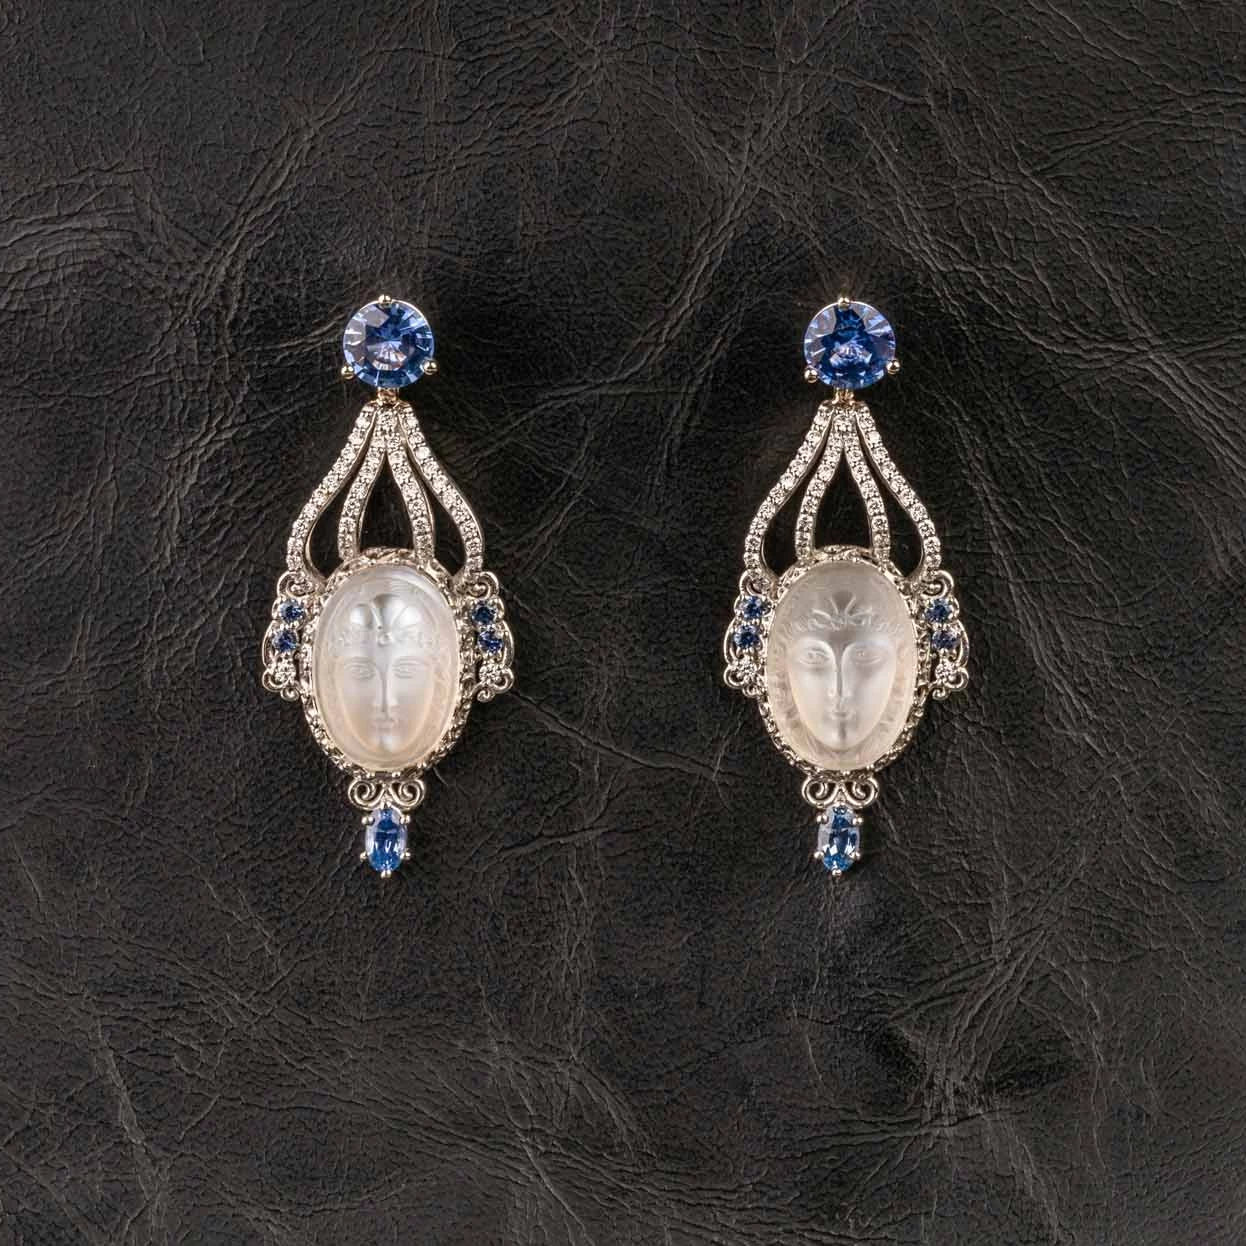 Custom Jewelry, Lady in the moonstone jackets, blue sapphire studs, llyn strong, Greenville, South Carolina